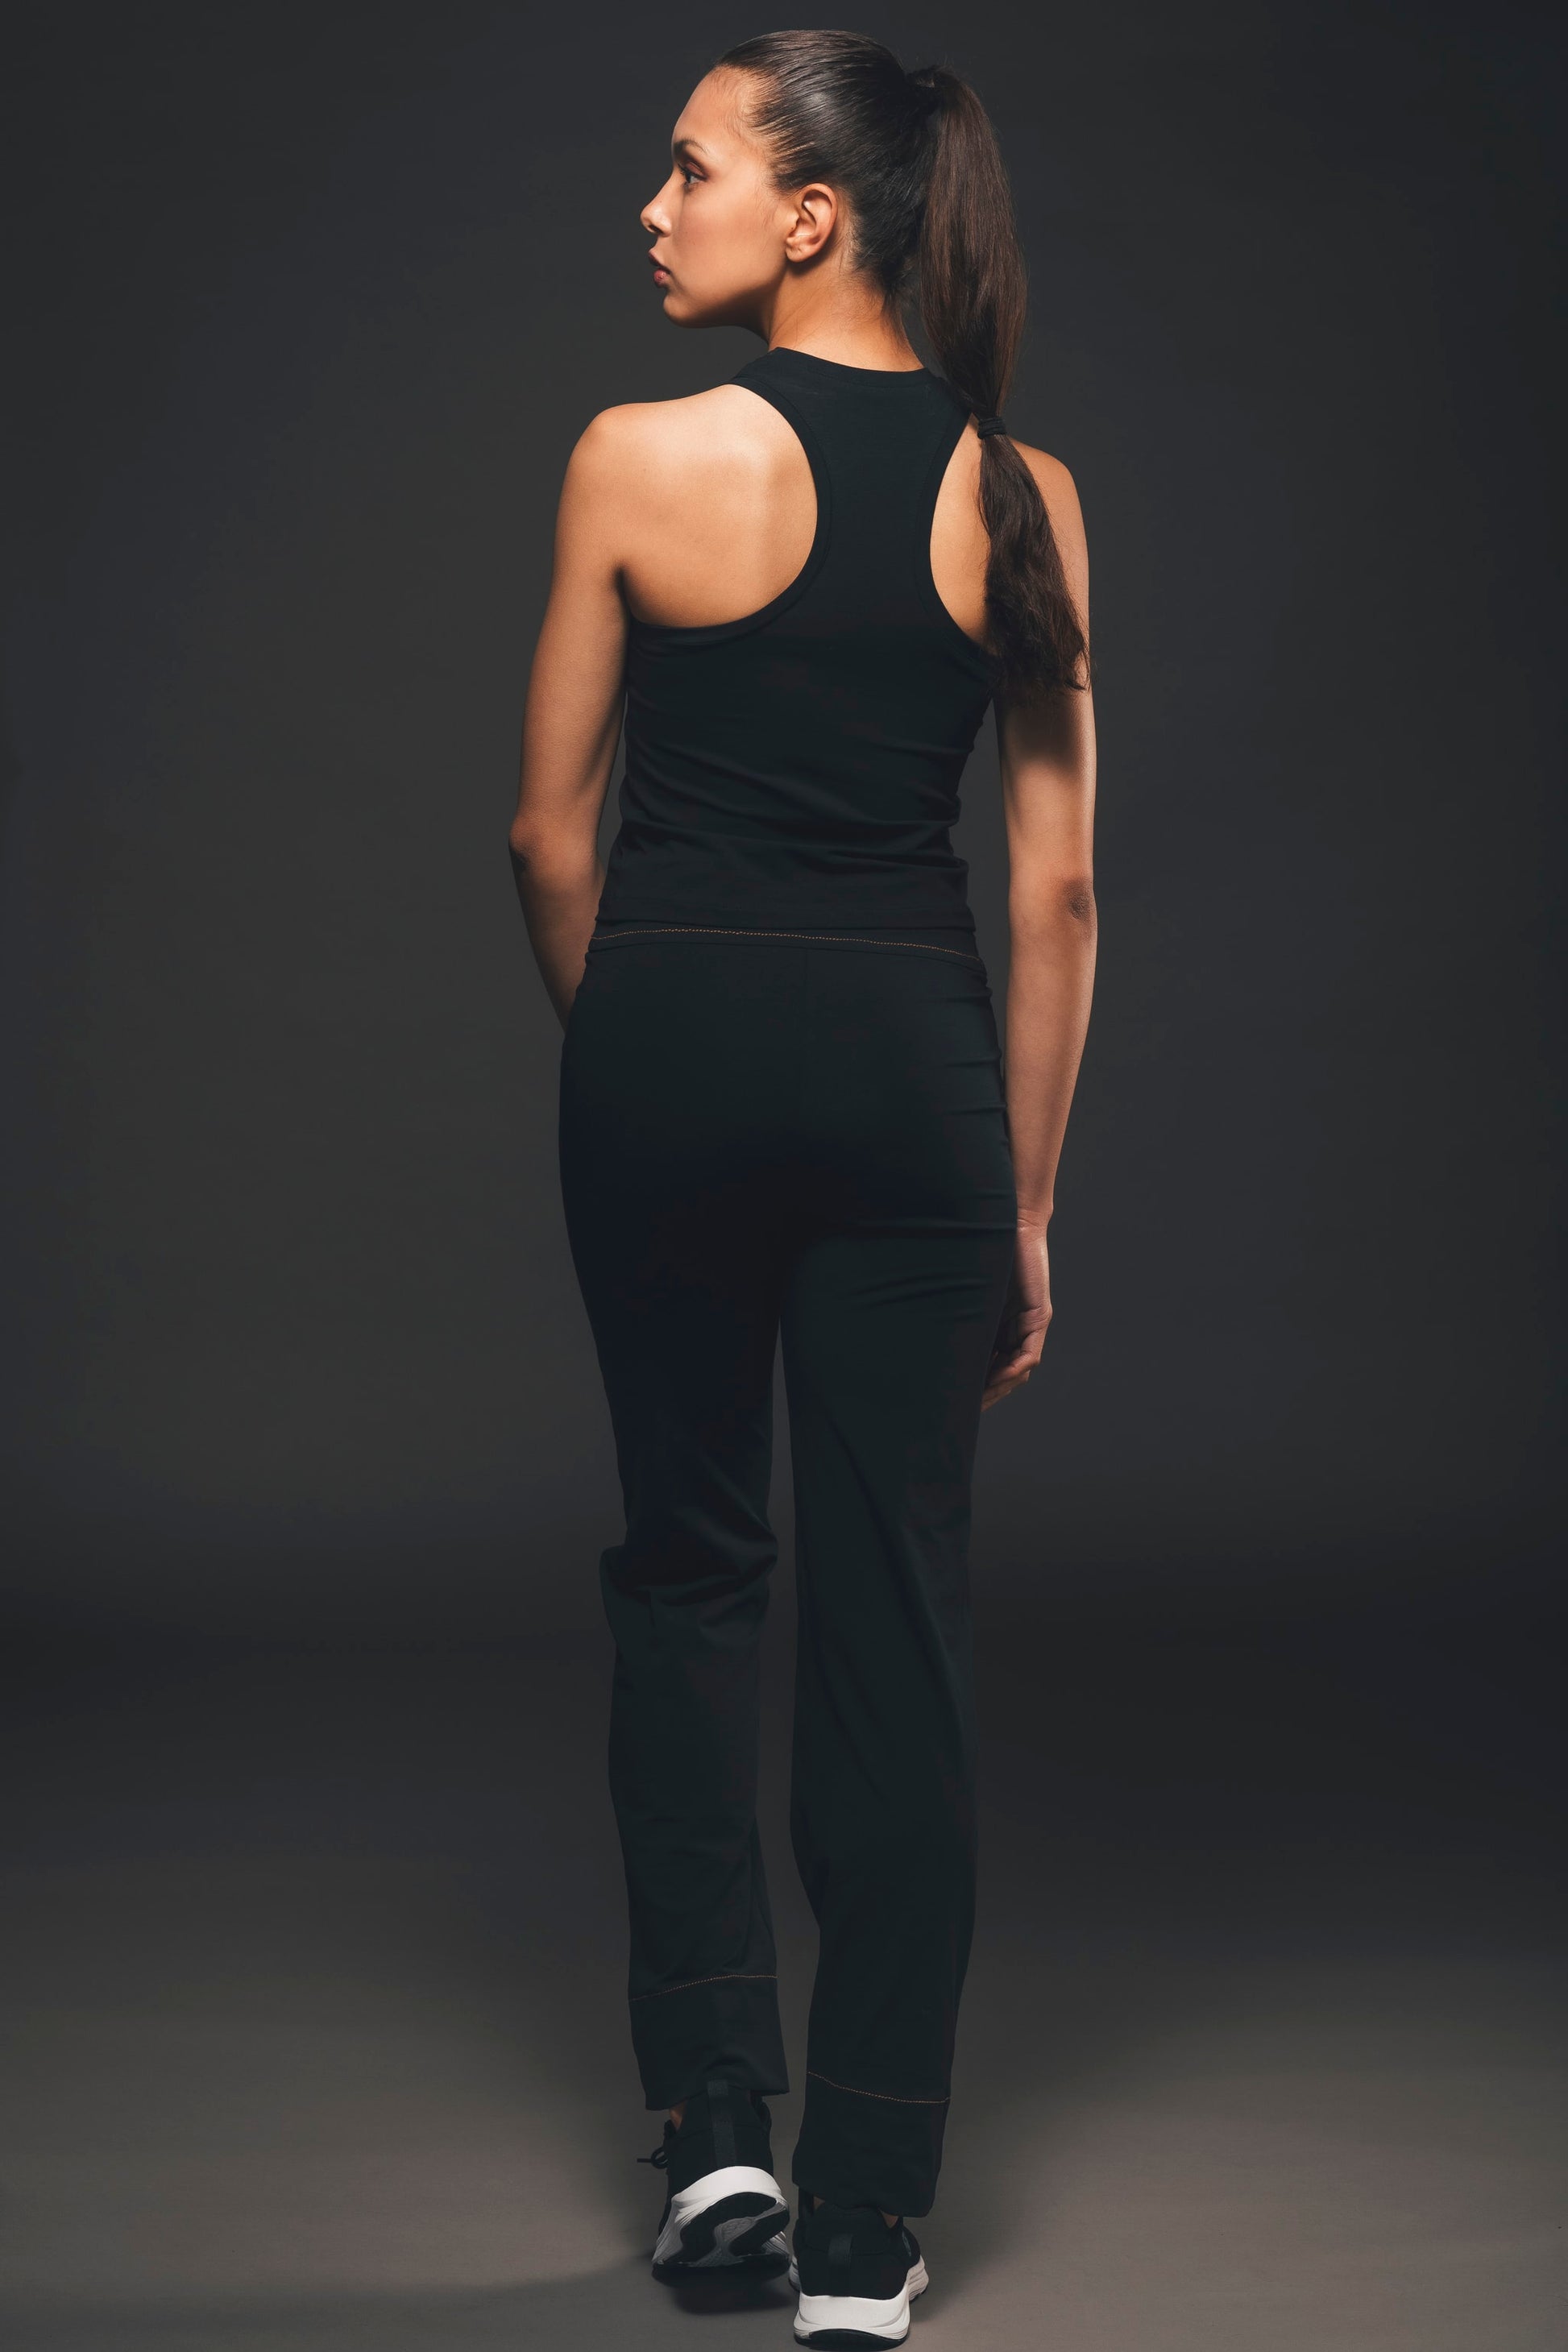 Image of back of black tank top made by Organique, a sustainable clothing brand.